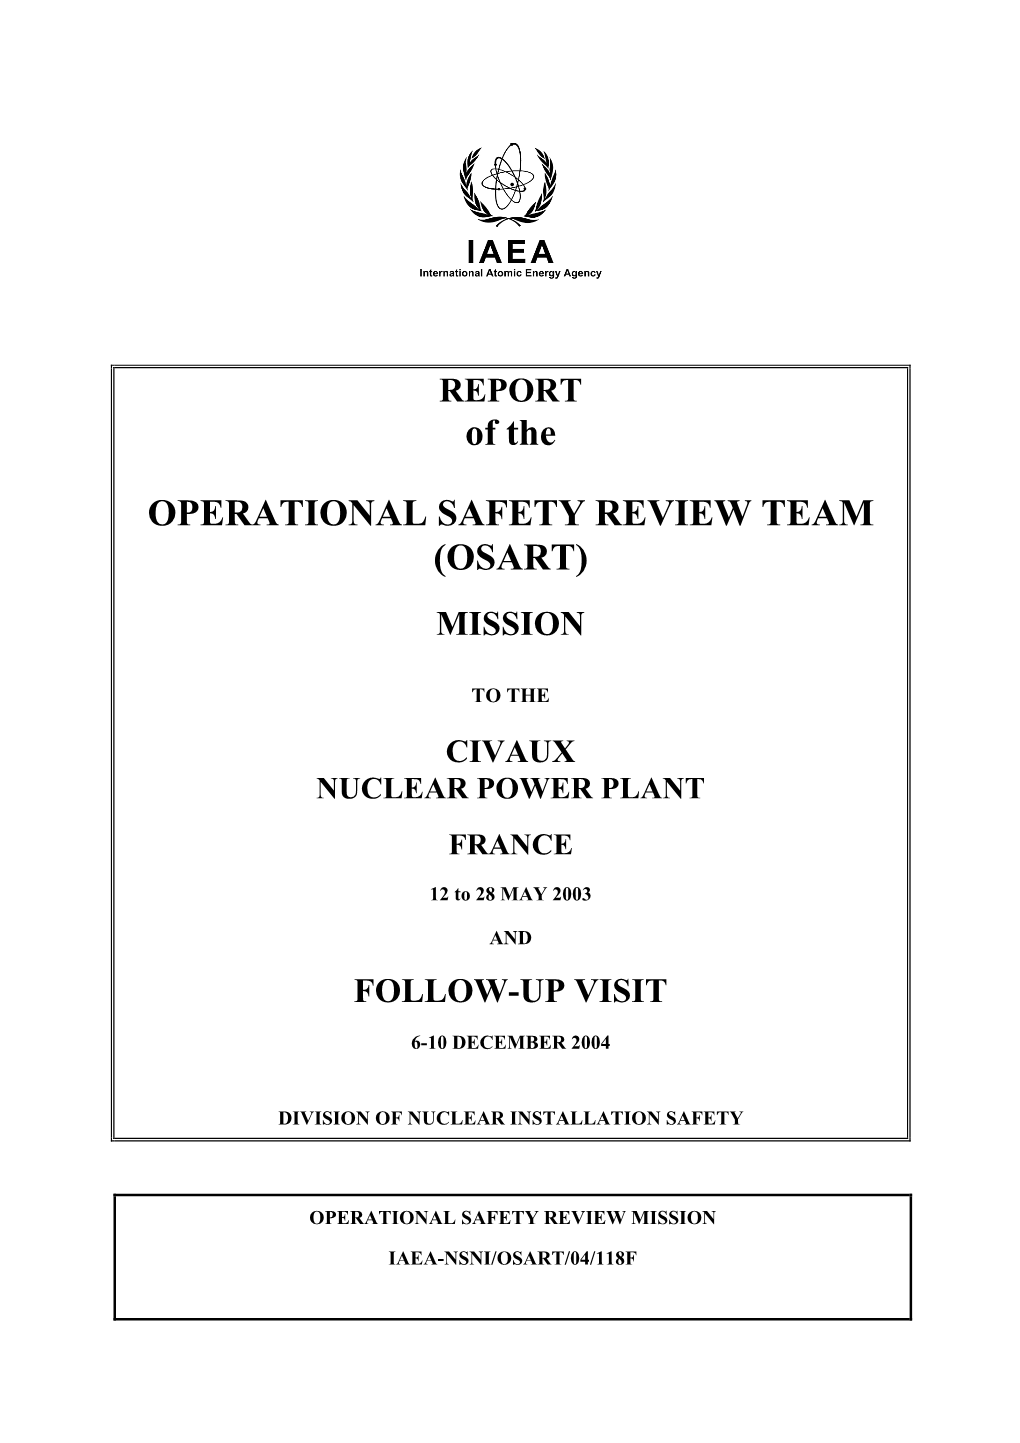 Of the OPERATIONAL SAFETY REVIEW TEAM (OSART)